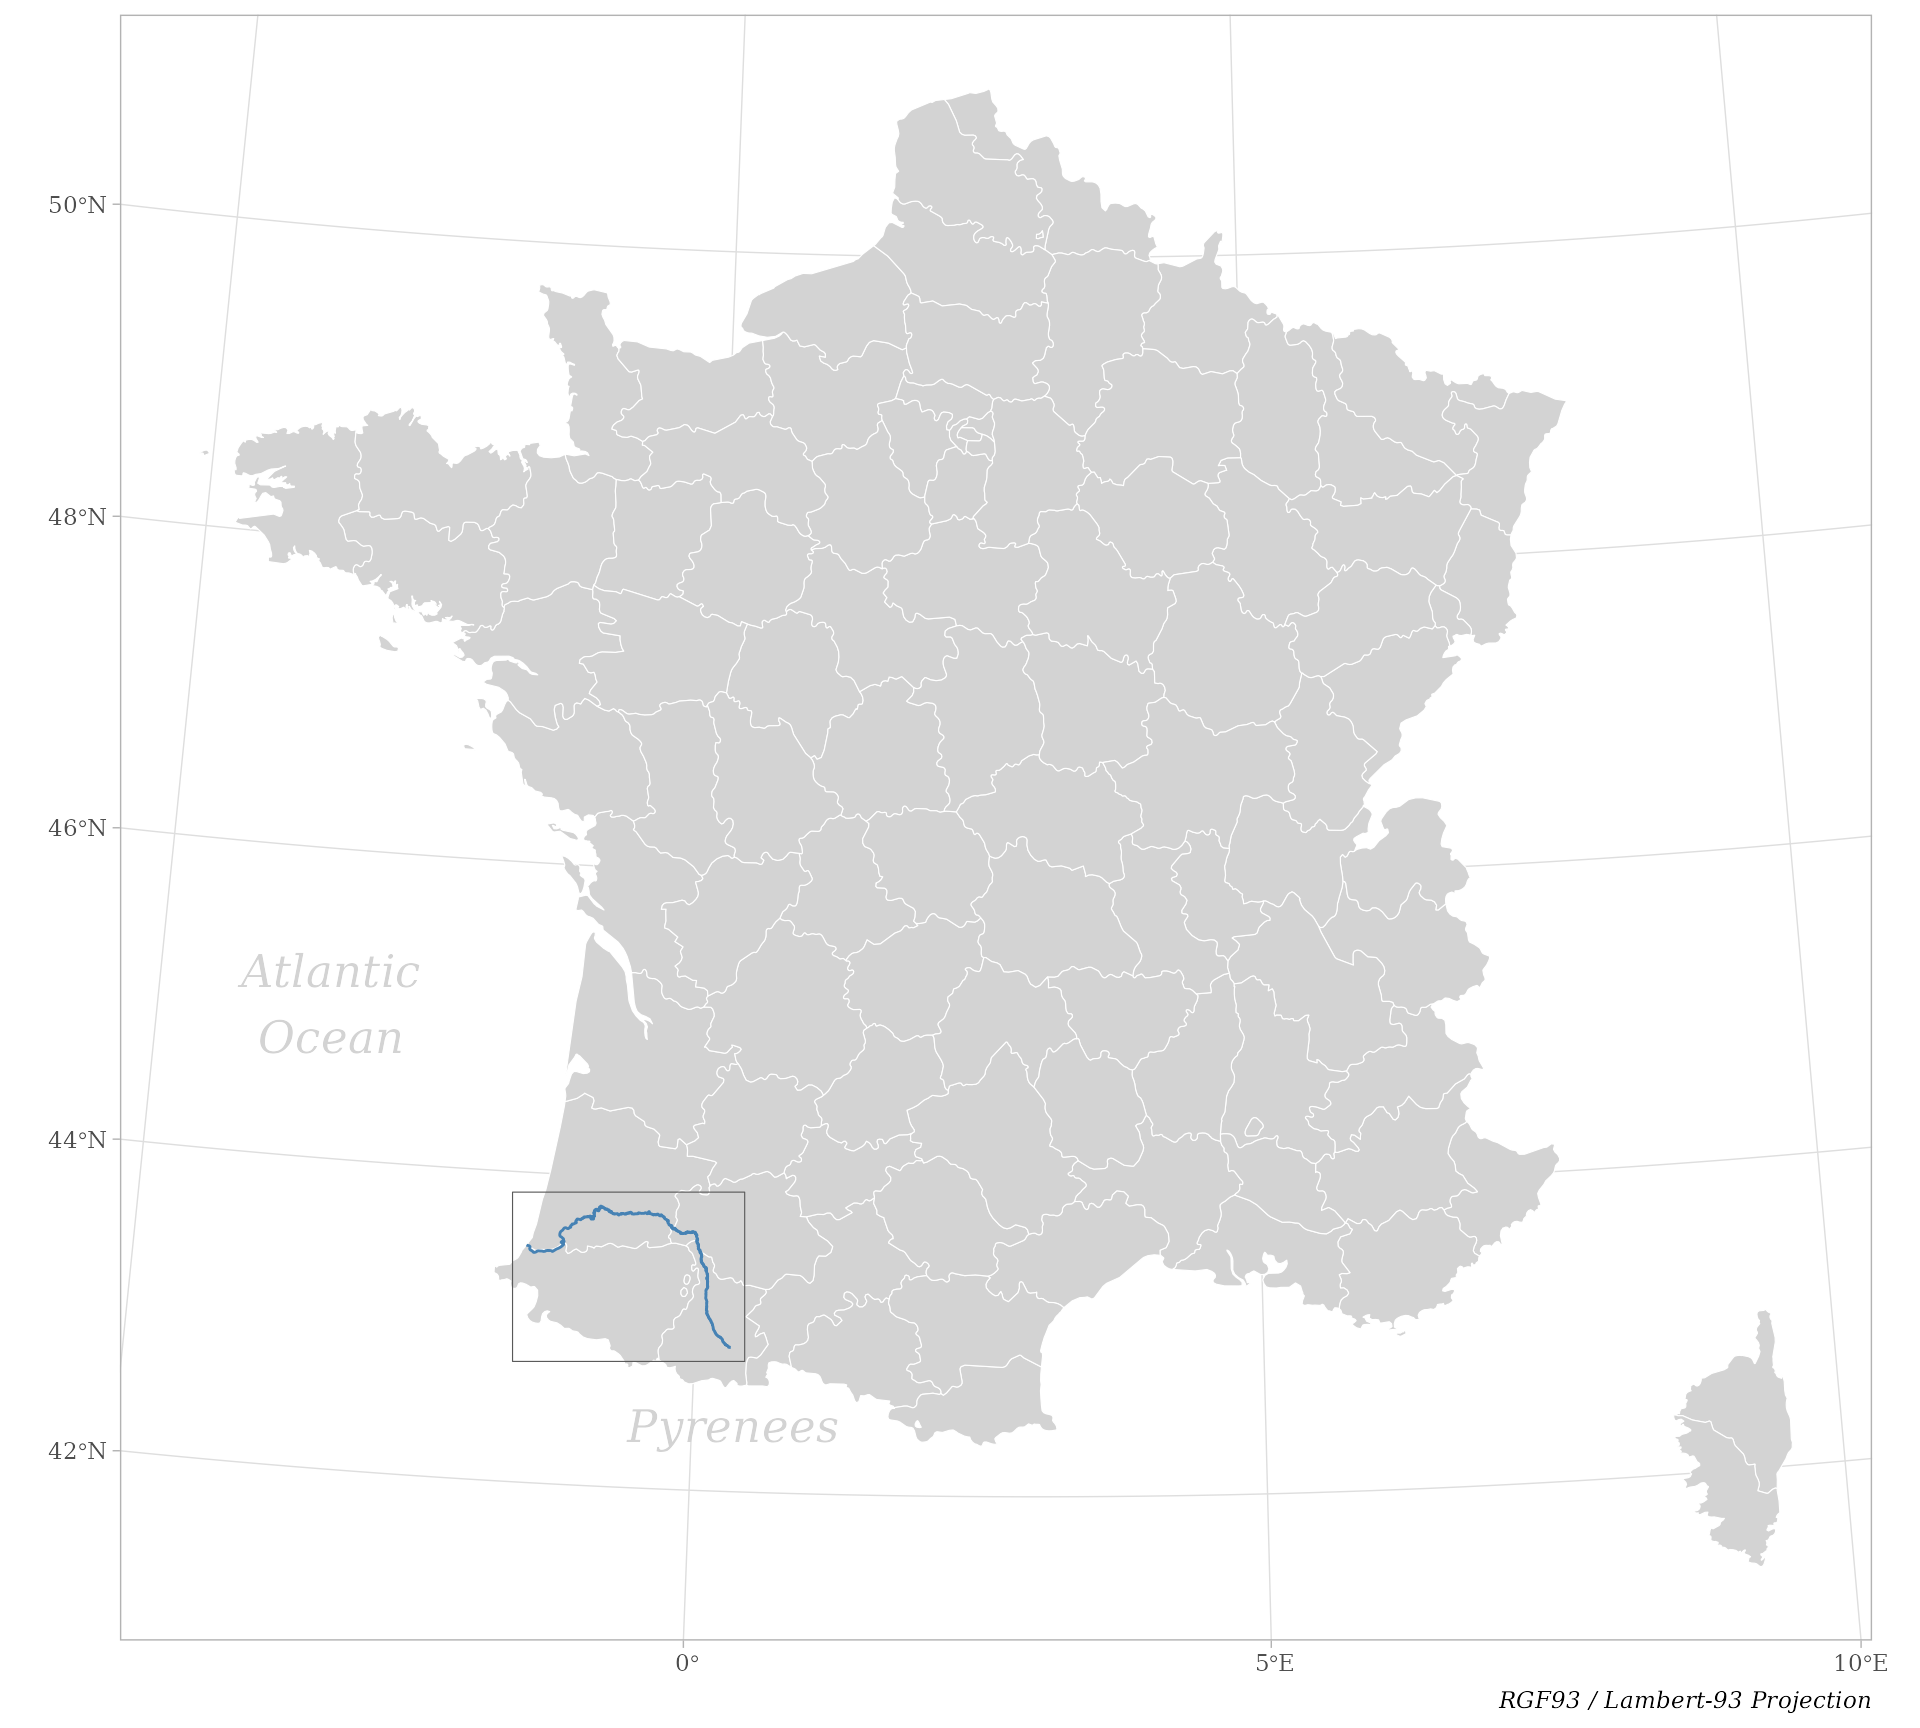 Figure 3. Location of the French river L'Adour